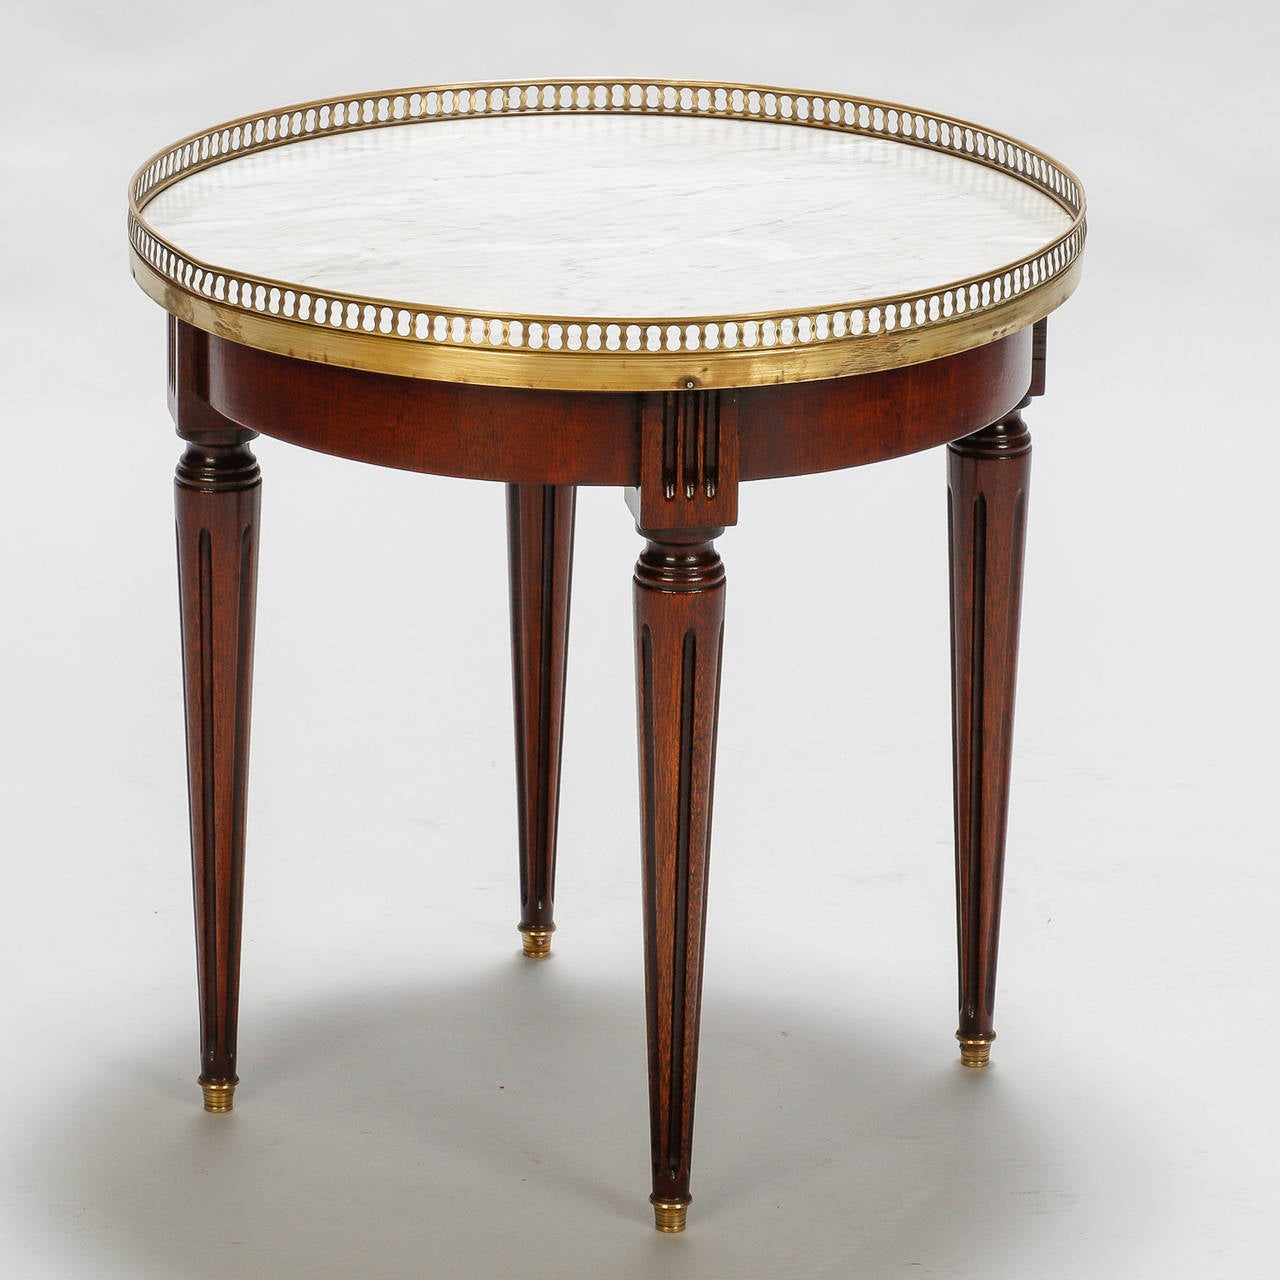 Brass Gallery And White Marble Top, Antique Round Side Table With Marble Top